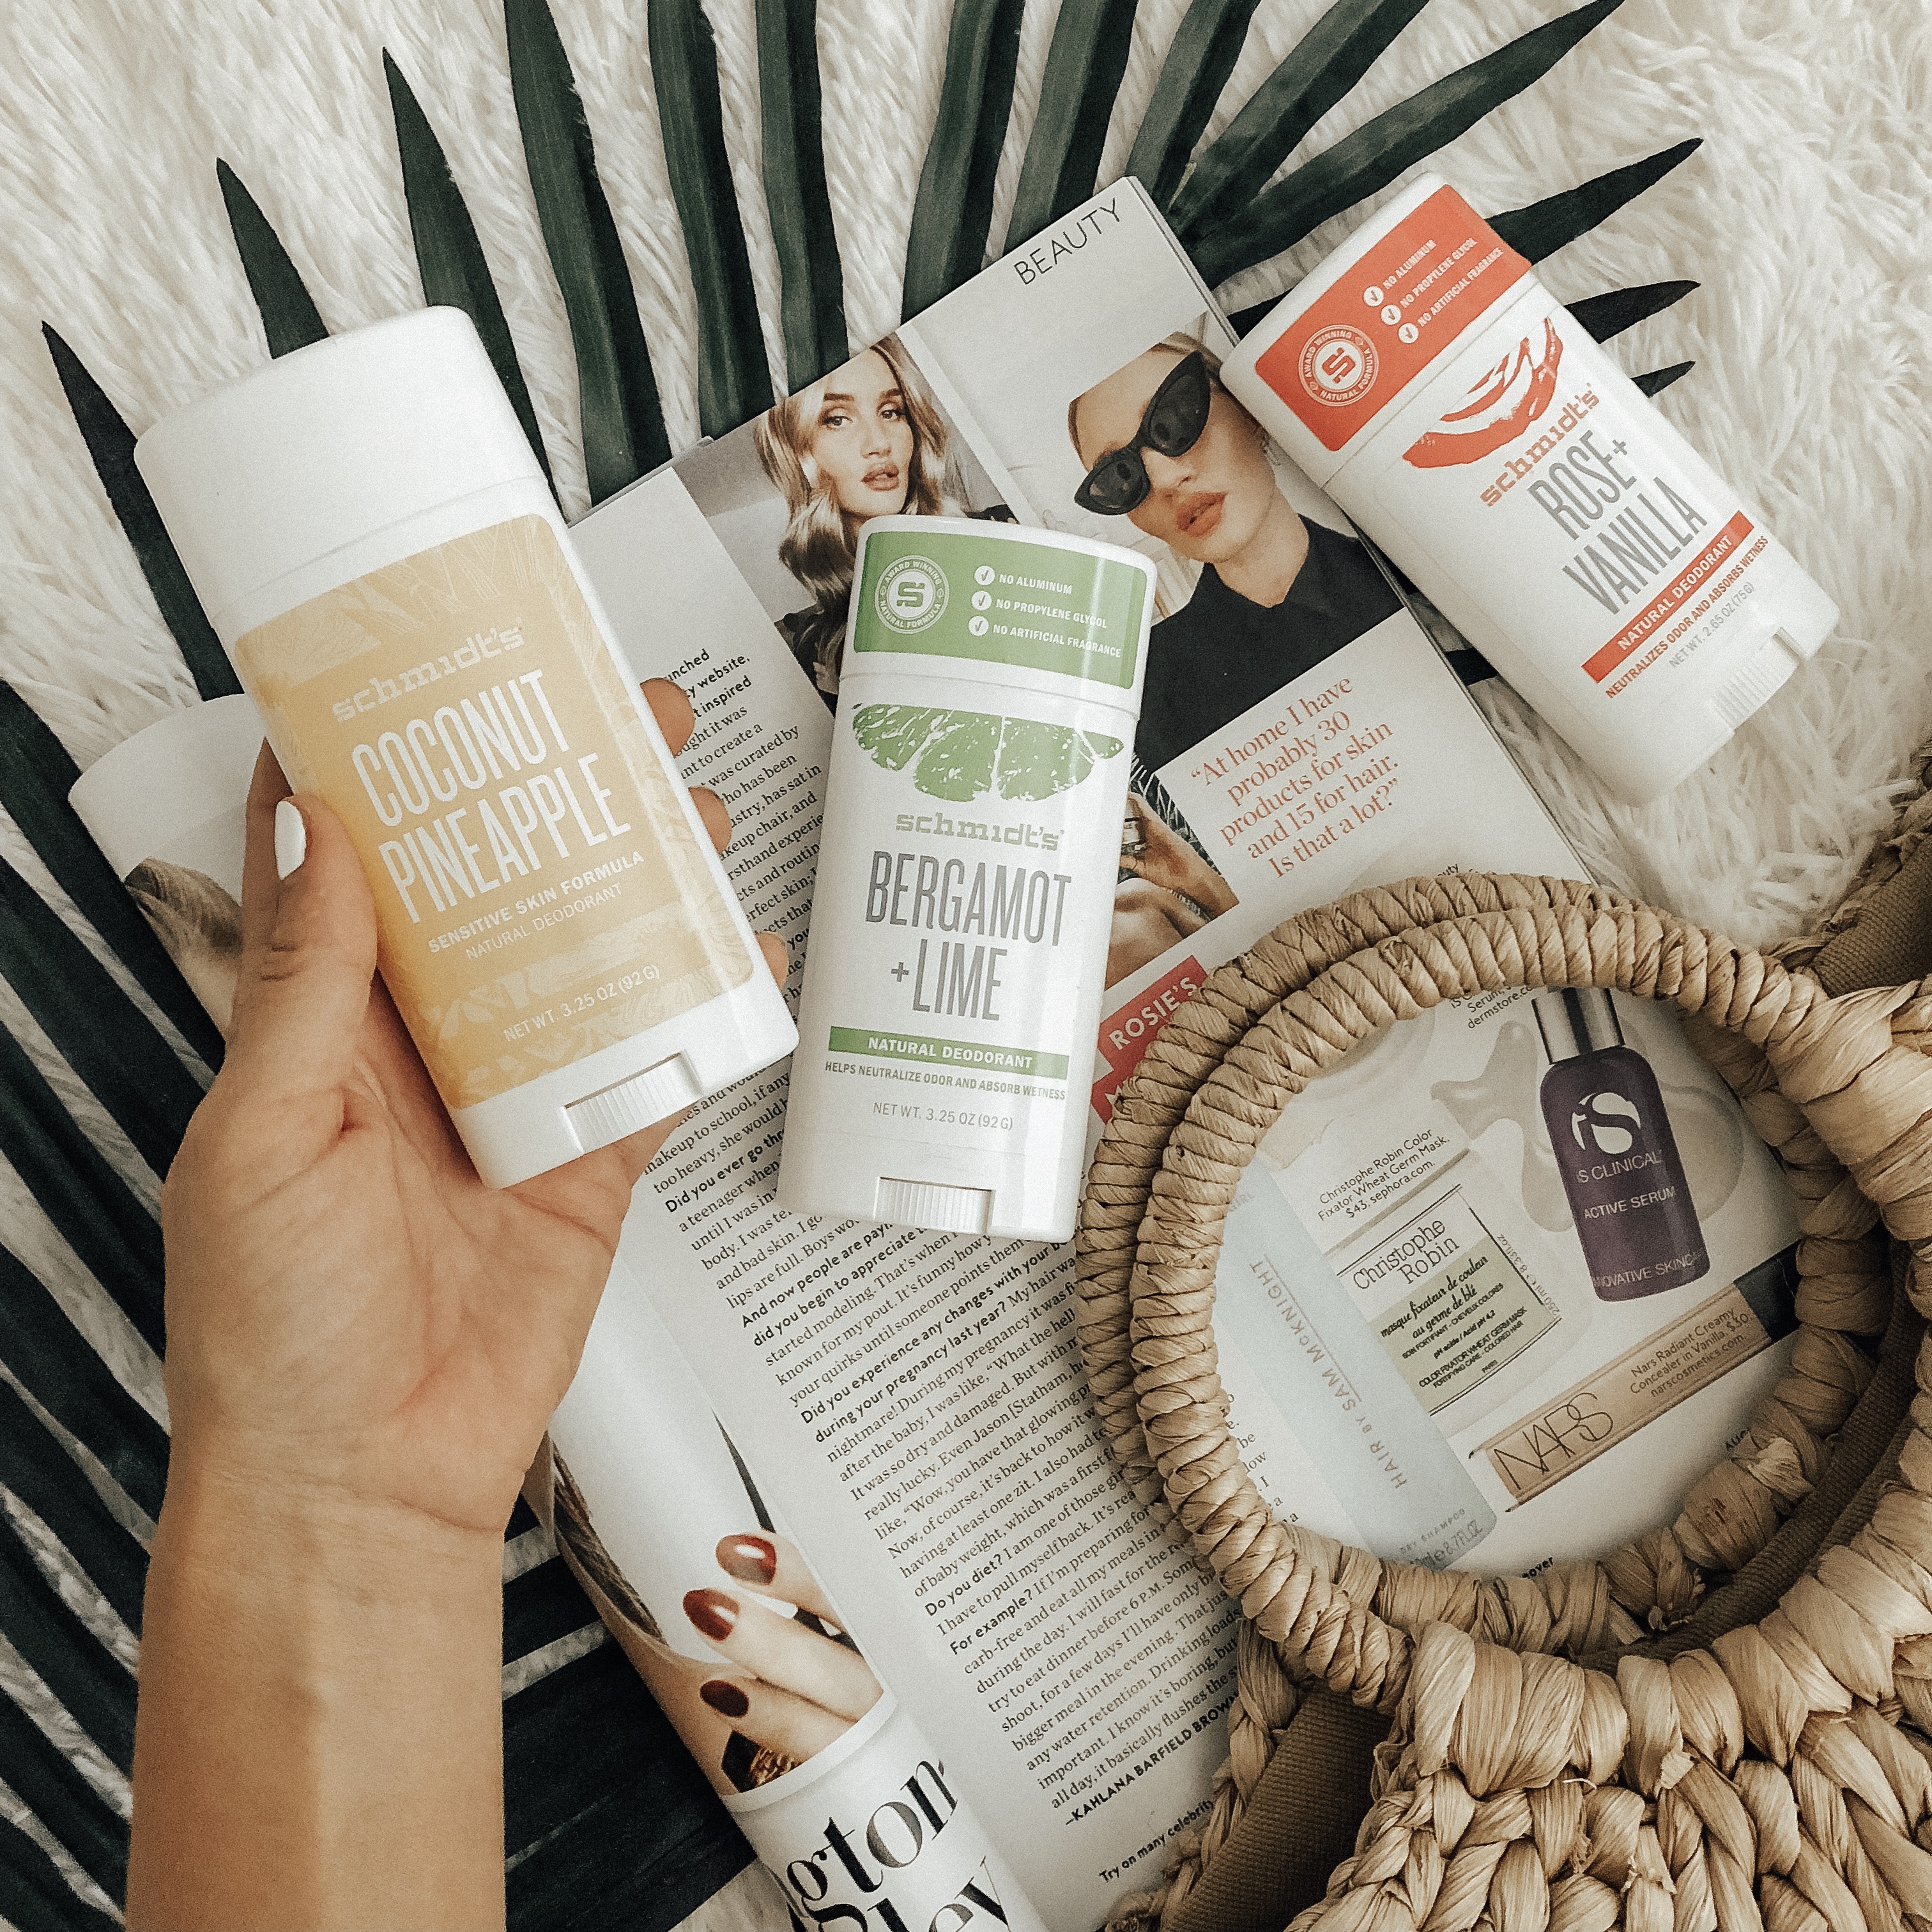 FINDING A NATURAL DEODORANT THAT ACTUALLY WORKS- Jaclyn De Leon Style + ALL NATURAL BEAUTY + BEAUTY BLOGGER + MUST HAVE PRODUCTS + BEAUTY REVIEW + SWAY UNDERARM DETOX + SCHMIDT'S + NATIVE + PARABEN FREE + ALUMINUM FREE + HEALTHY DEODORANT